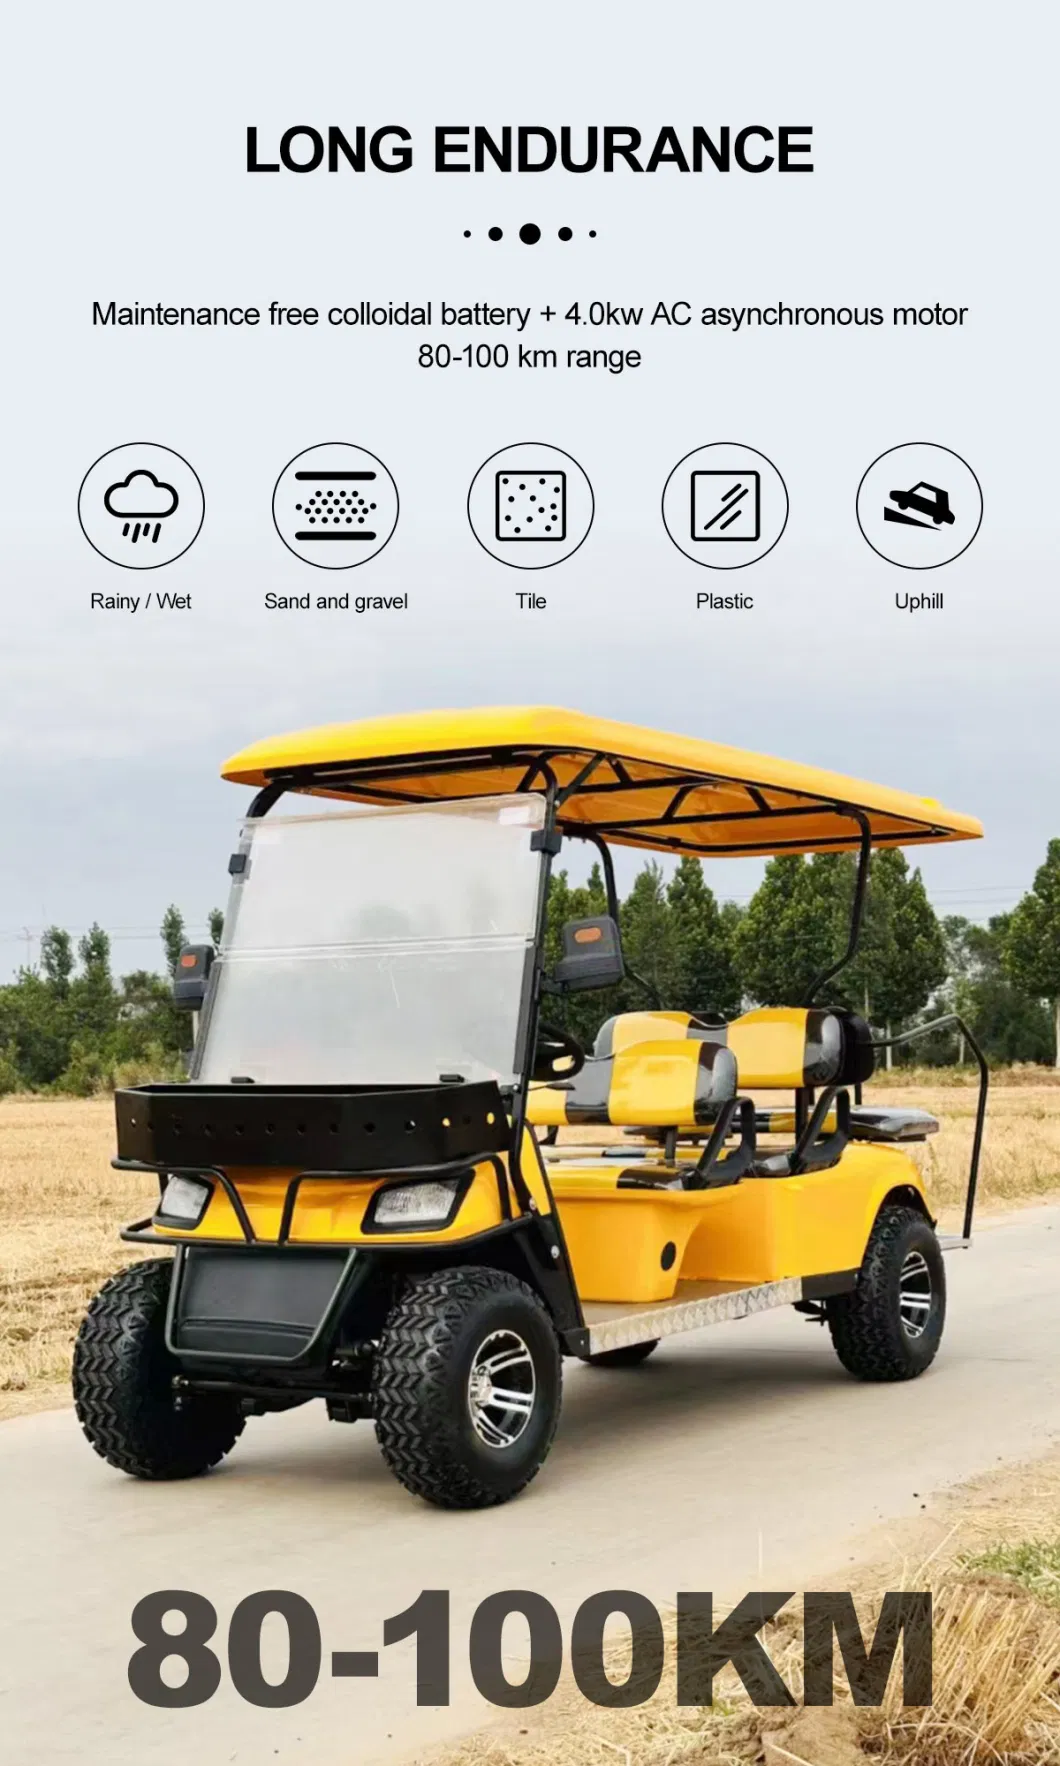 2024 Feiyueda 6 4 2 Seater Free Customized Color Street Legal Electric Yellow Gulf Carts Electric Yellow Golf Car